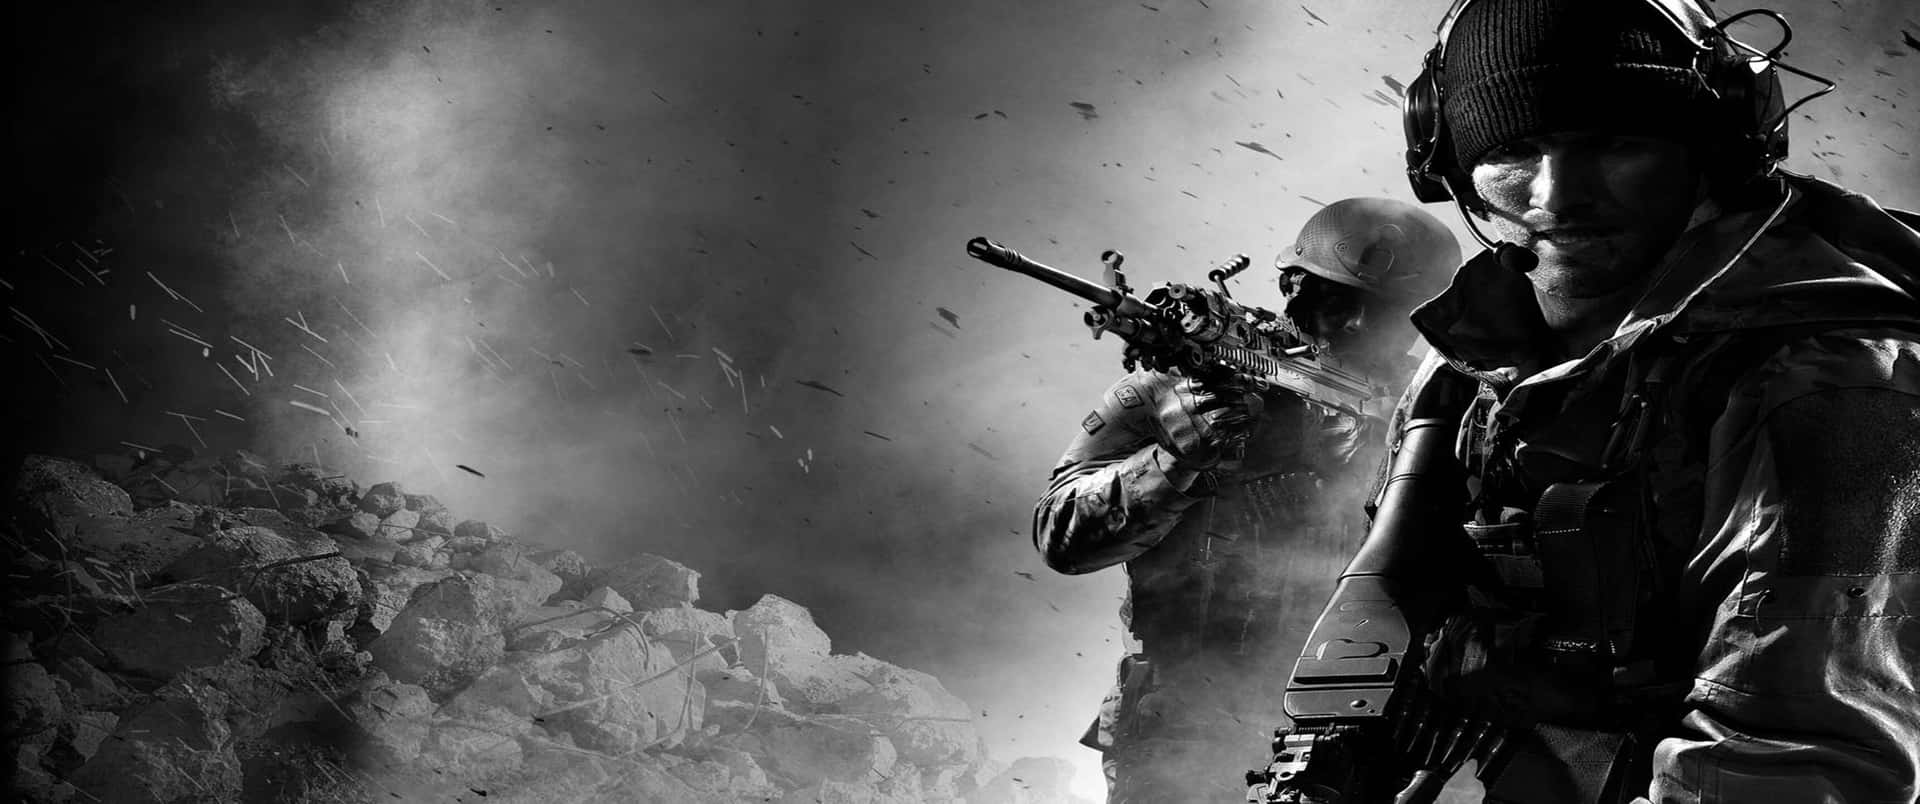 Military Soldiers 3440x1440p Call Of Duty Modern Warfare Background